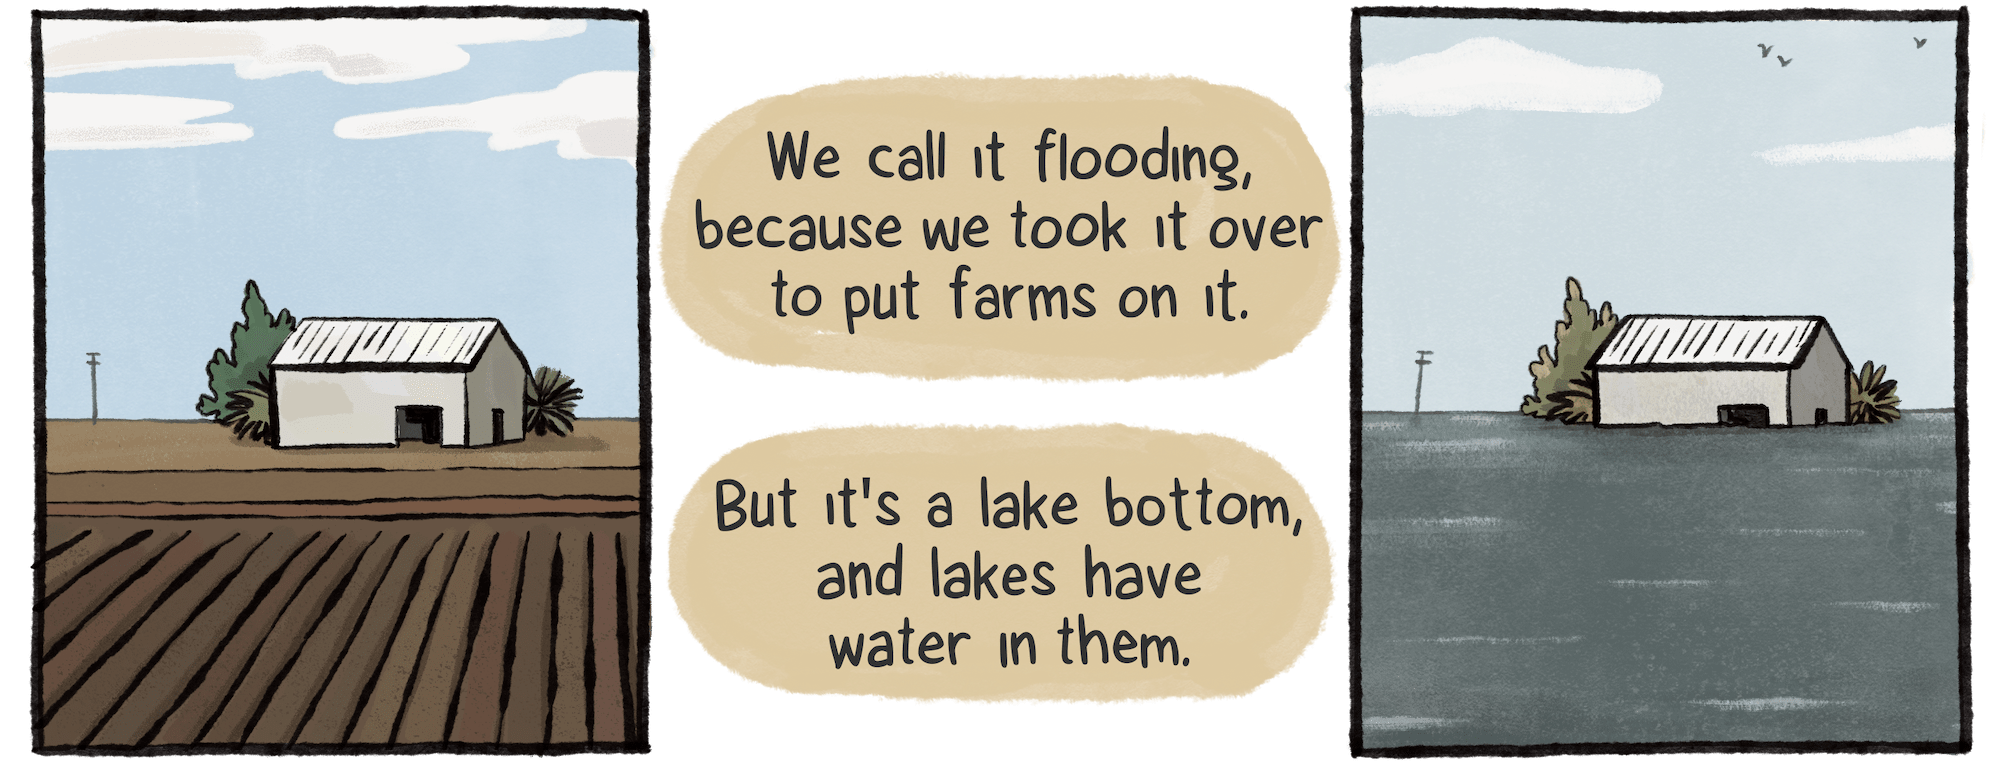 Hansen says, “We call it flooding because we took it over to put farms on it. But it’s a lake bottom, and lakes have water in them,” between two pictures that show farmland dry and under water.